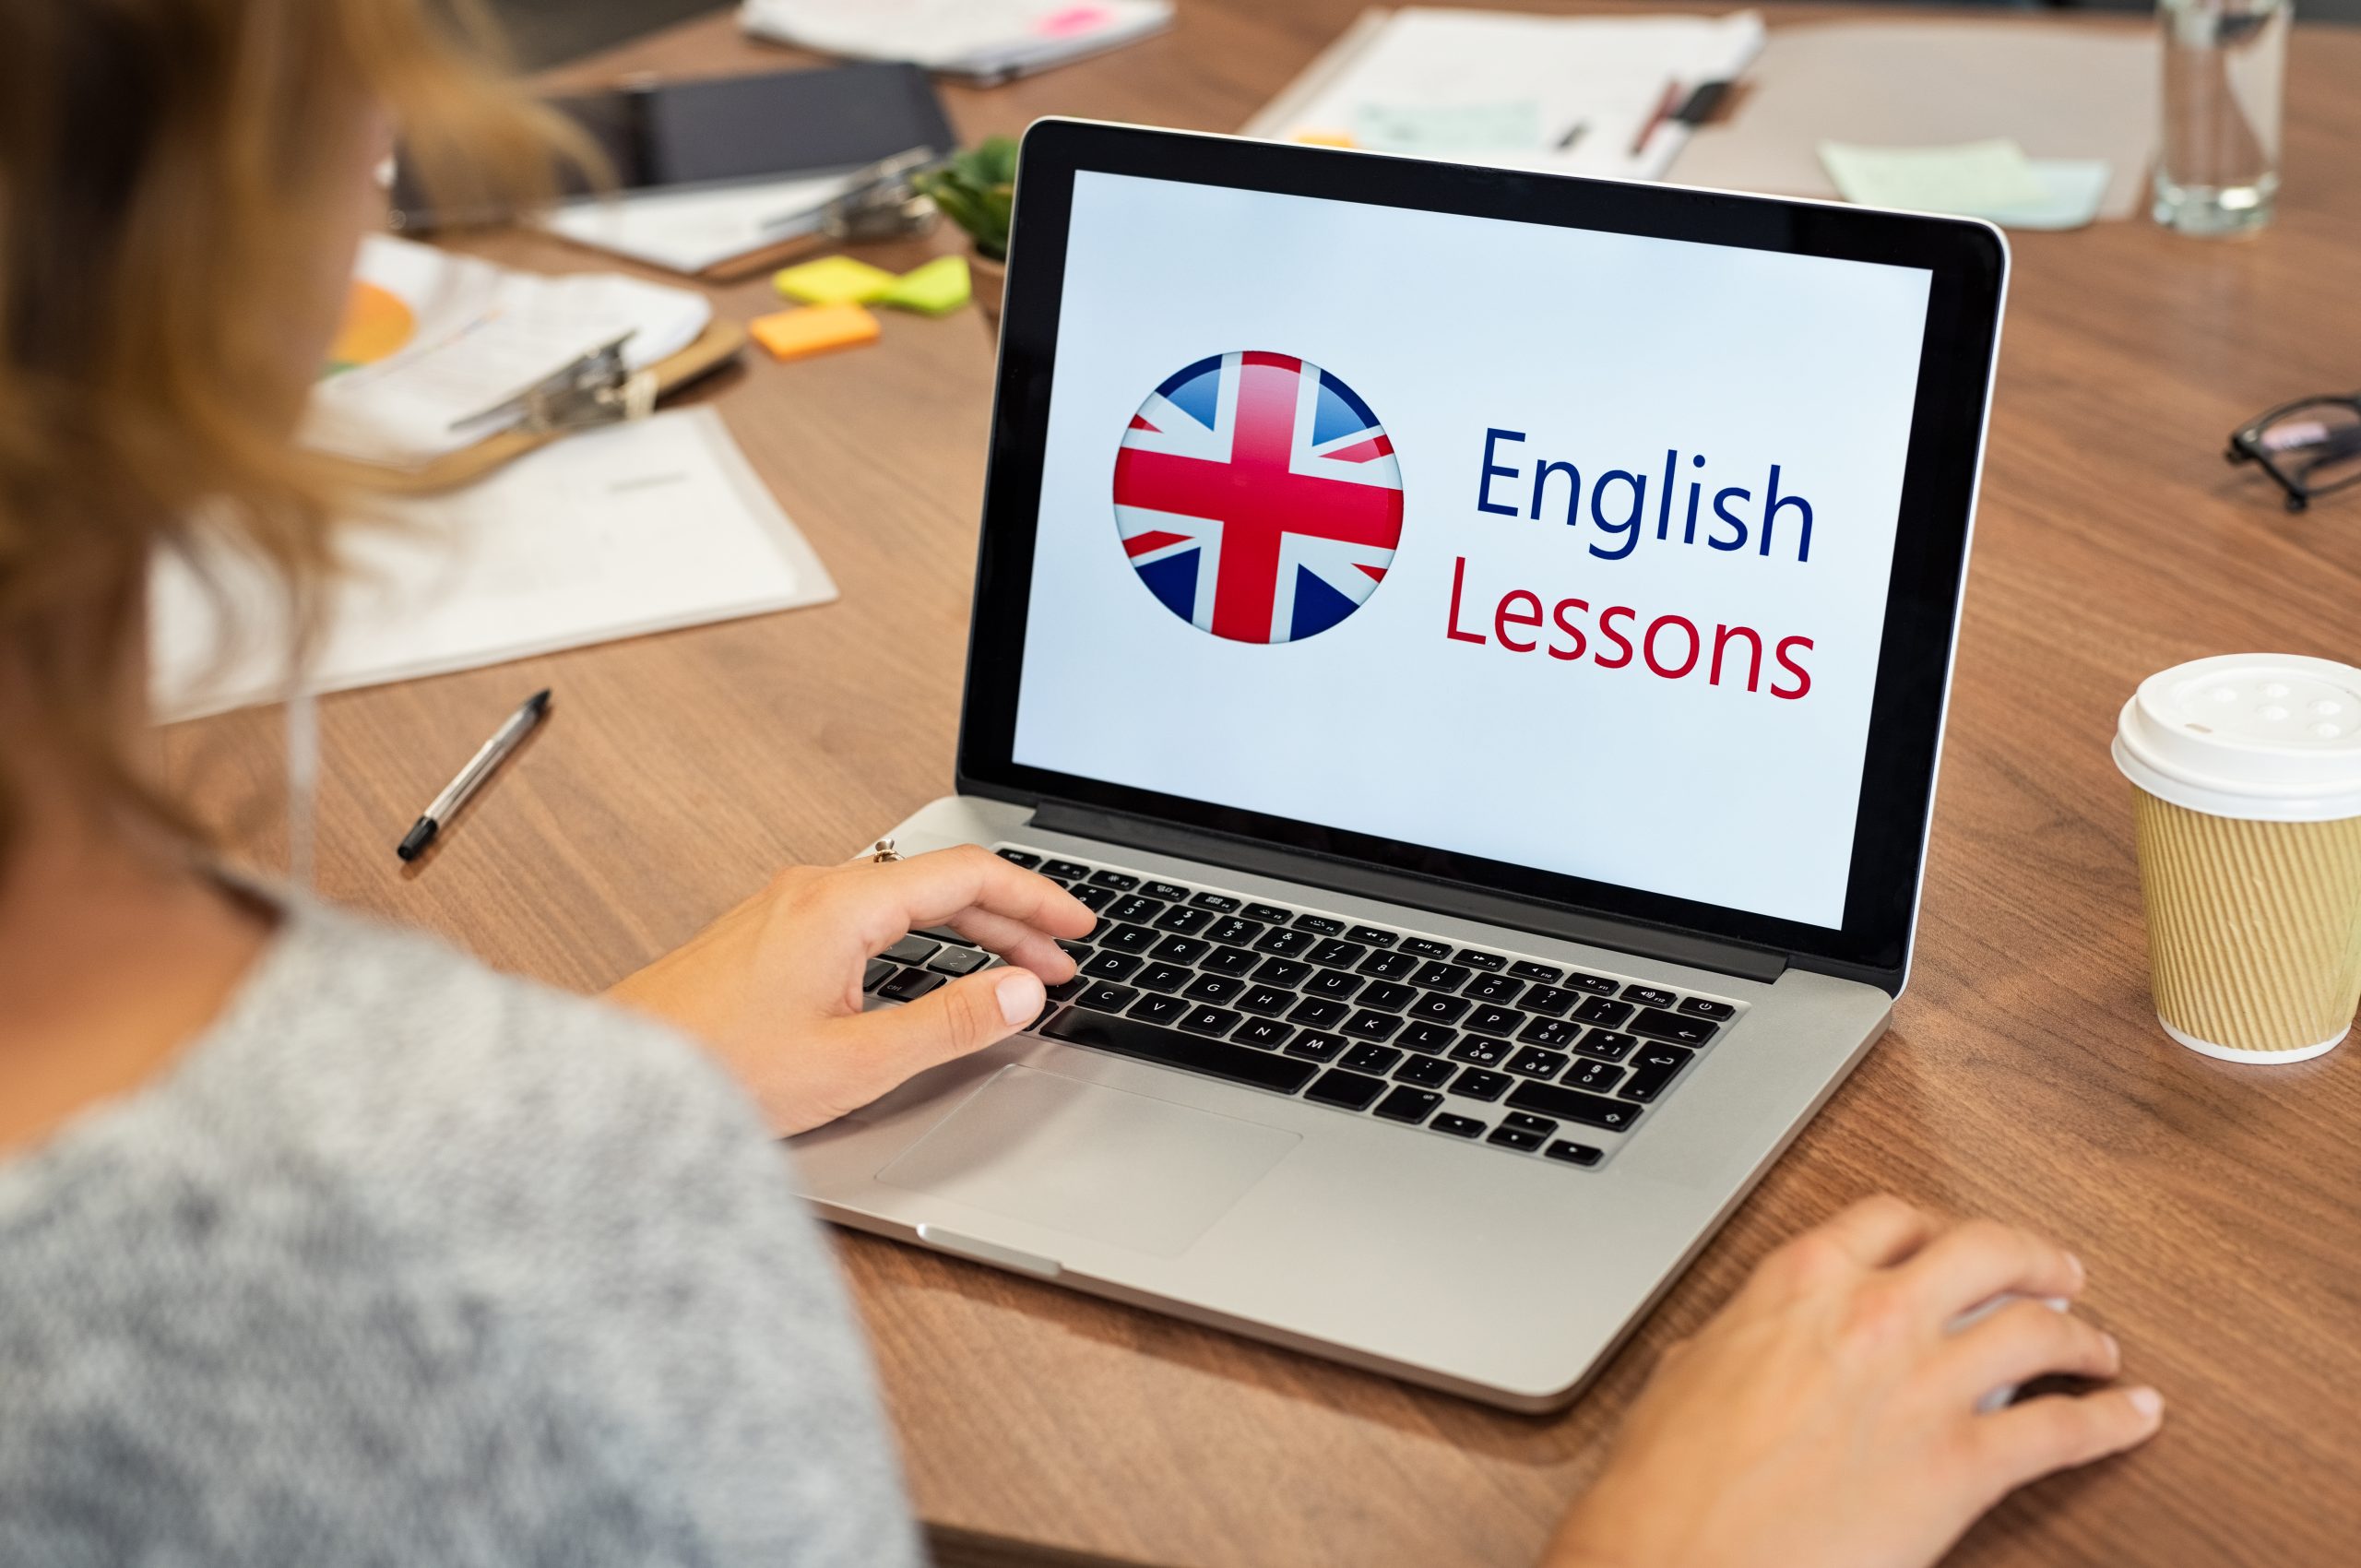 Mature woman learning English online with computer at office. Laptop screen of woman displaying english lessons poster with British flag. Closeup of student using laptop doing online course on english.